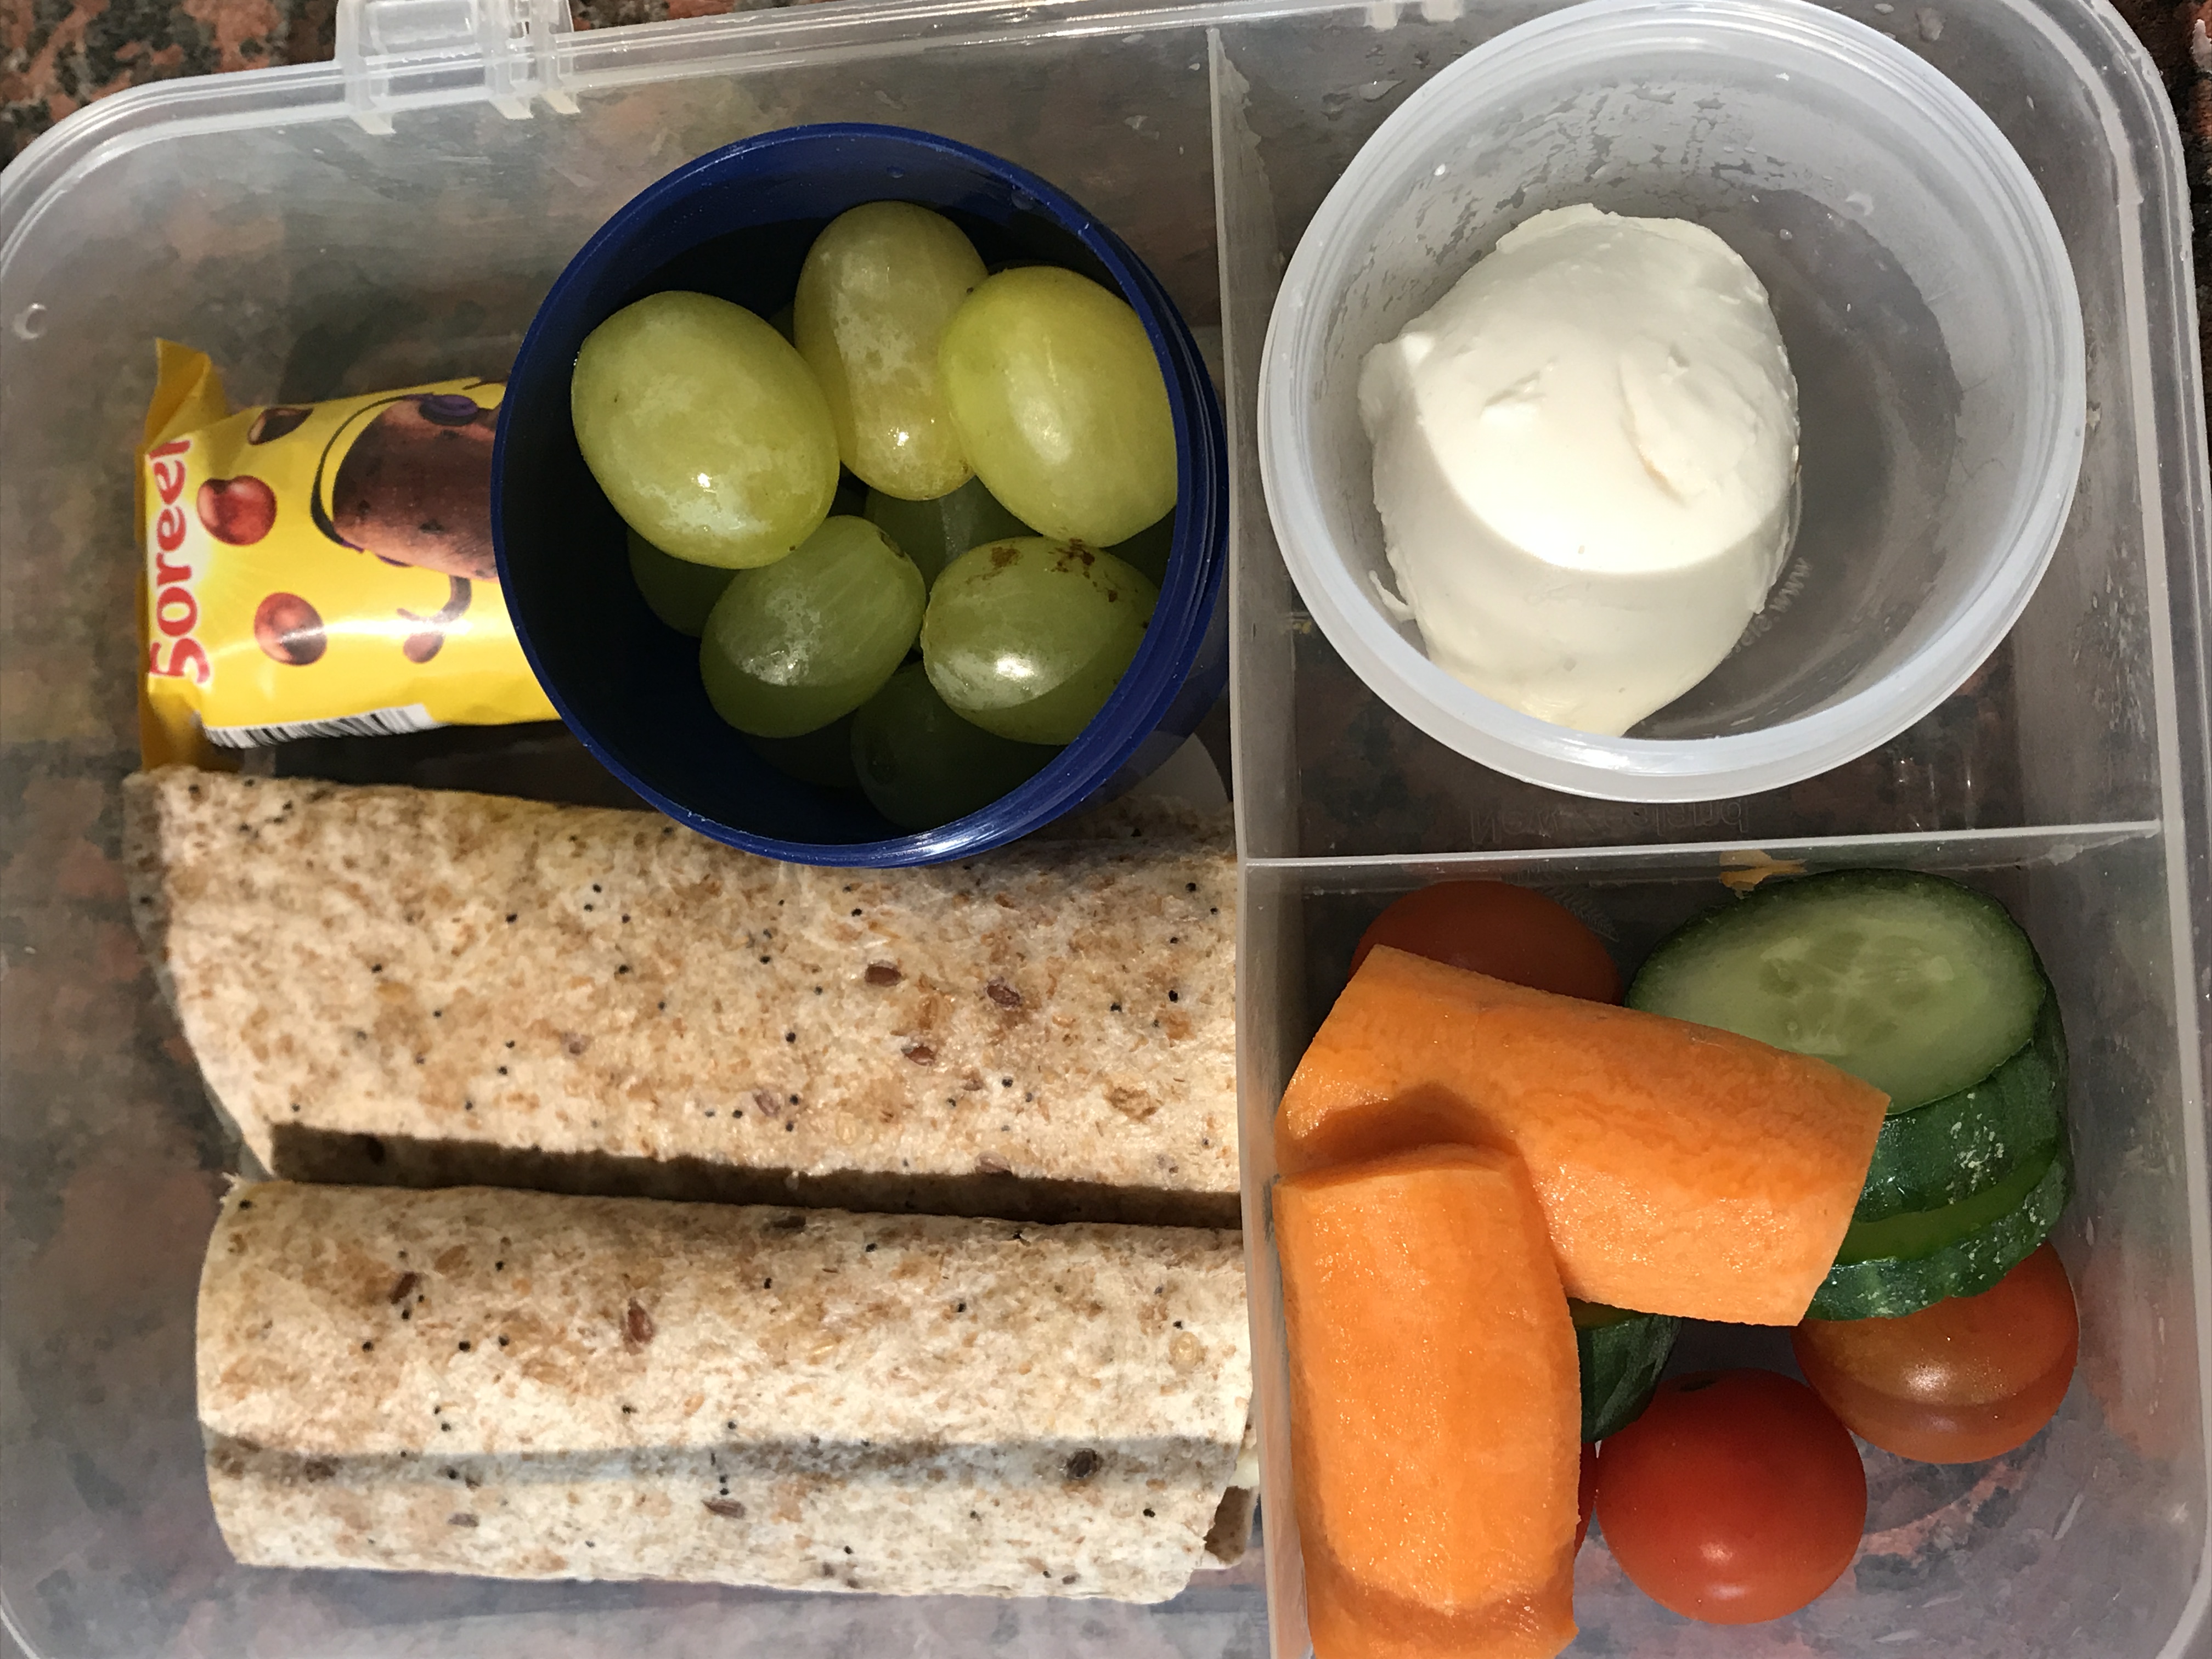 Packed Lunches 4